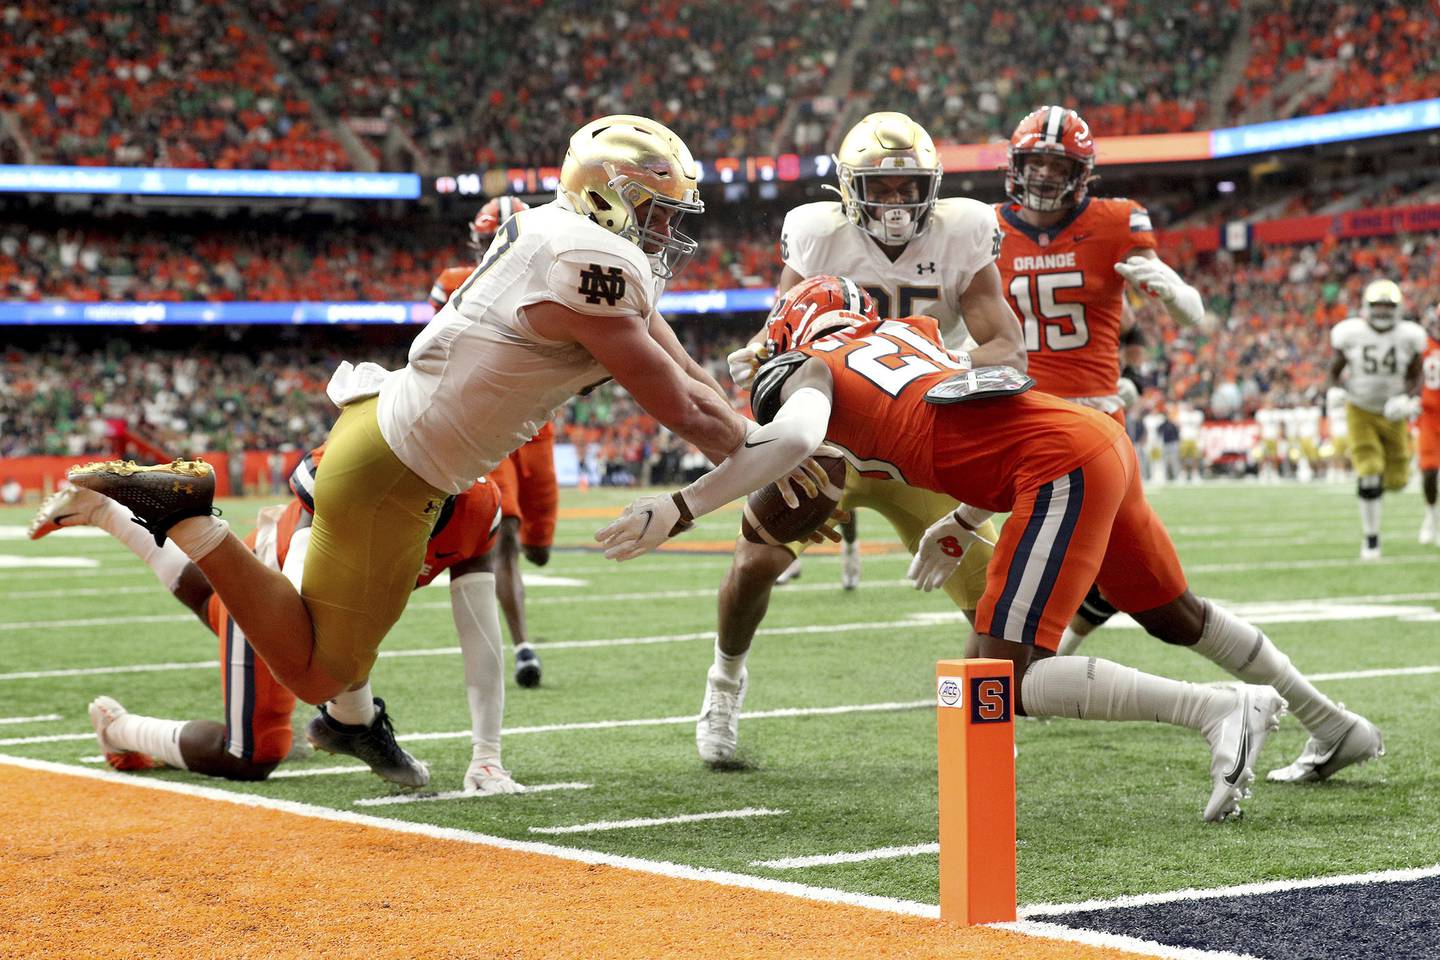 Notre Dame tight end Michael Mayer is tackled by Syracuse's Isaiah Johnson just shy of the end zone during the second quarter Saturday in Syracuse, N.Y. 